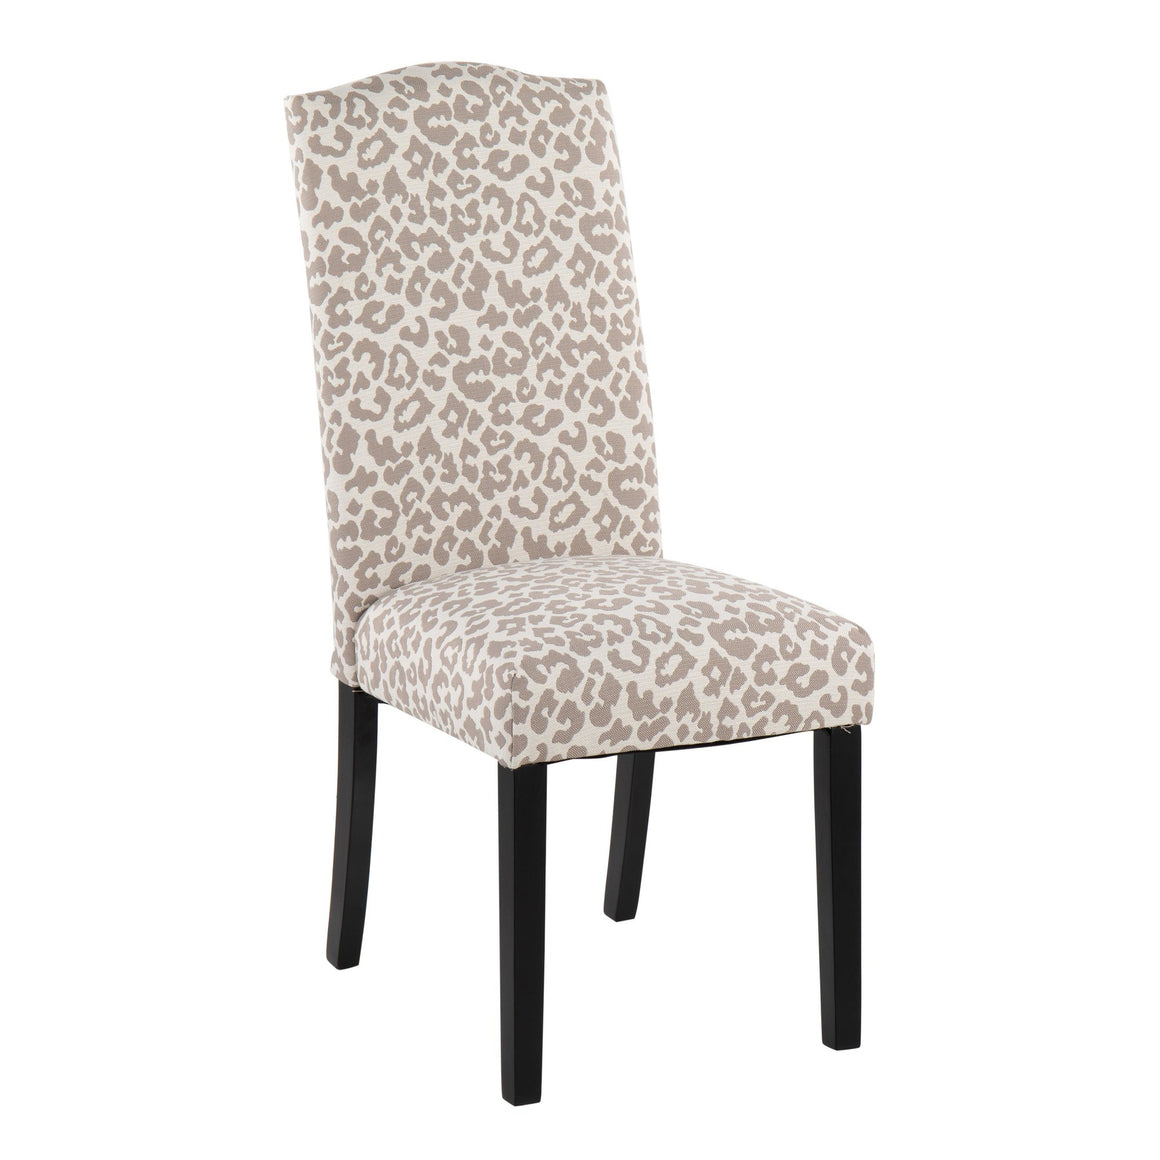 Leopard Contemporary Dining Chair in Black Wood and Grey Leopard Print Fabric by LumiSource